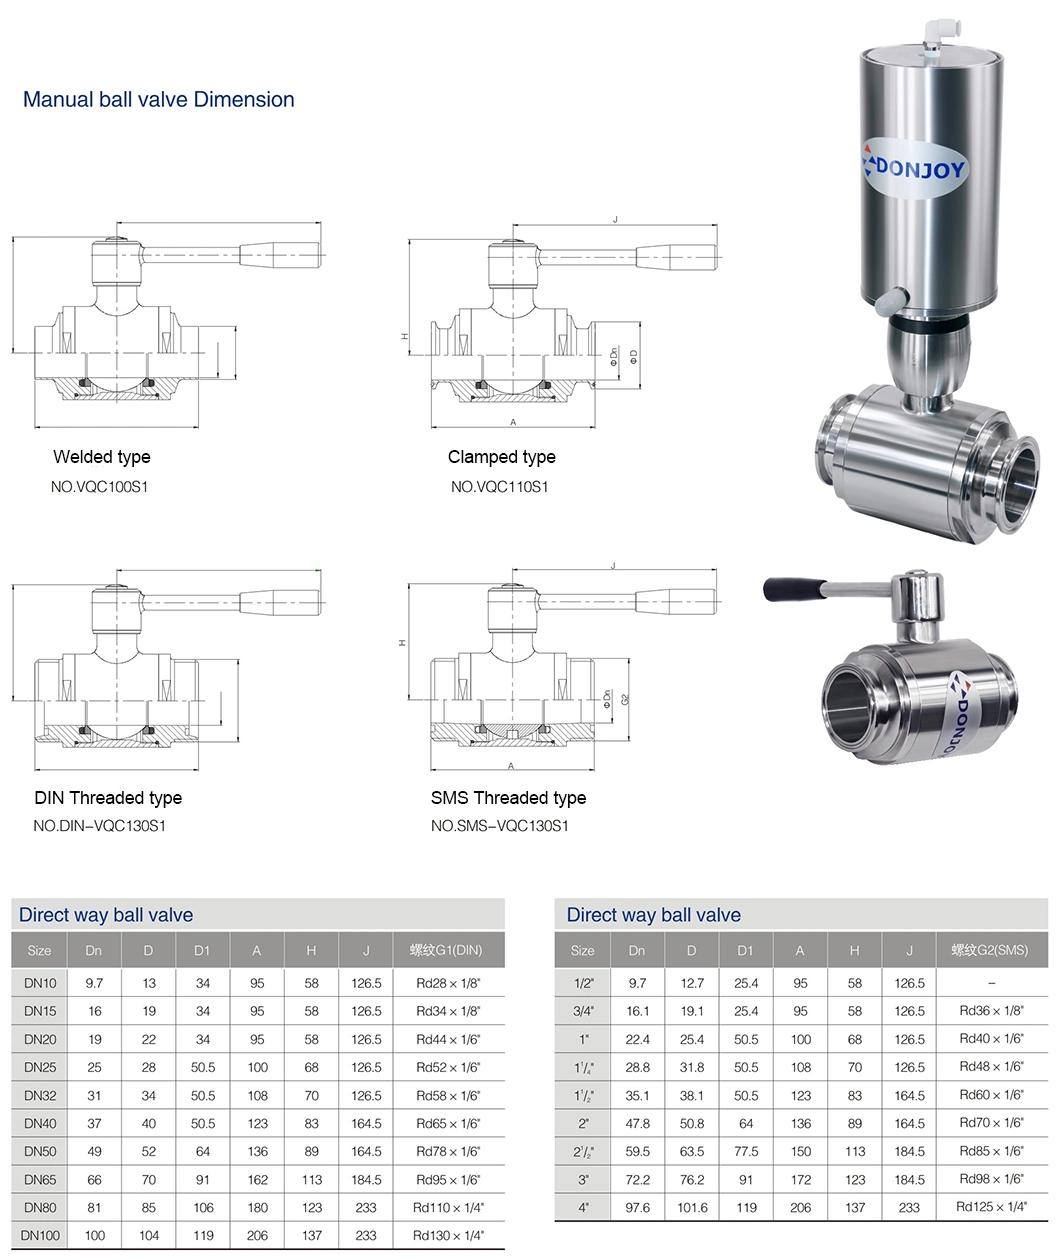 Us 3A Donjoy Sanitary Ball Valve with Control